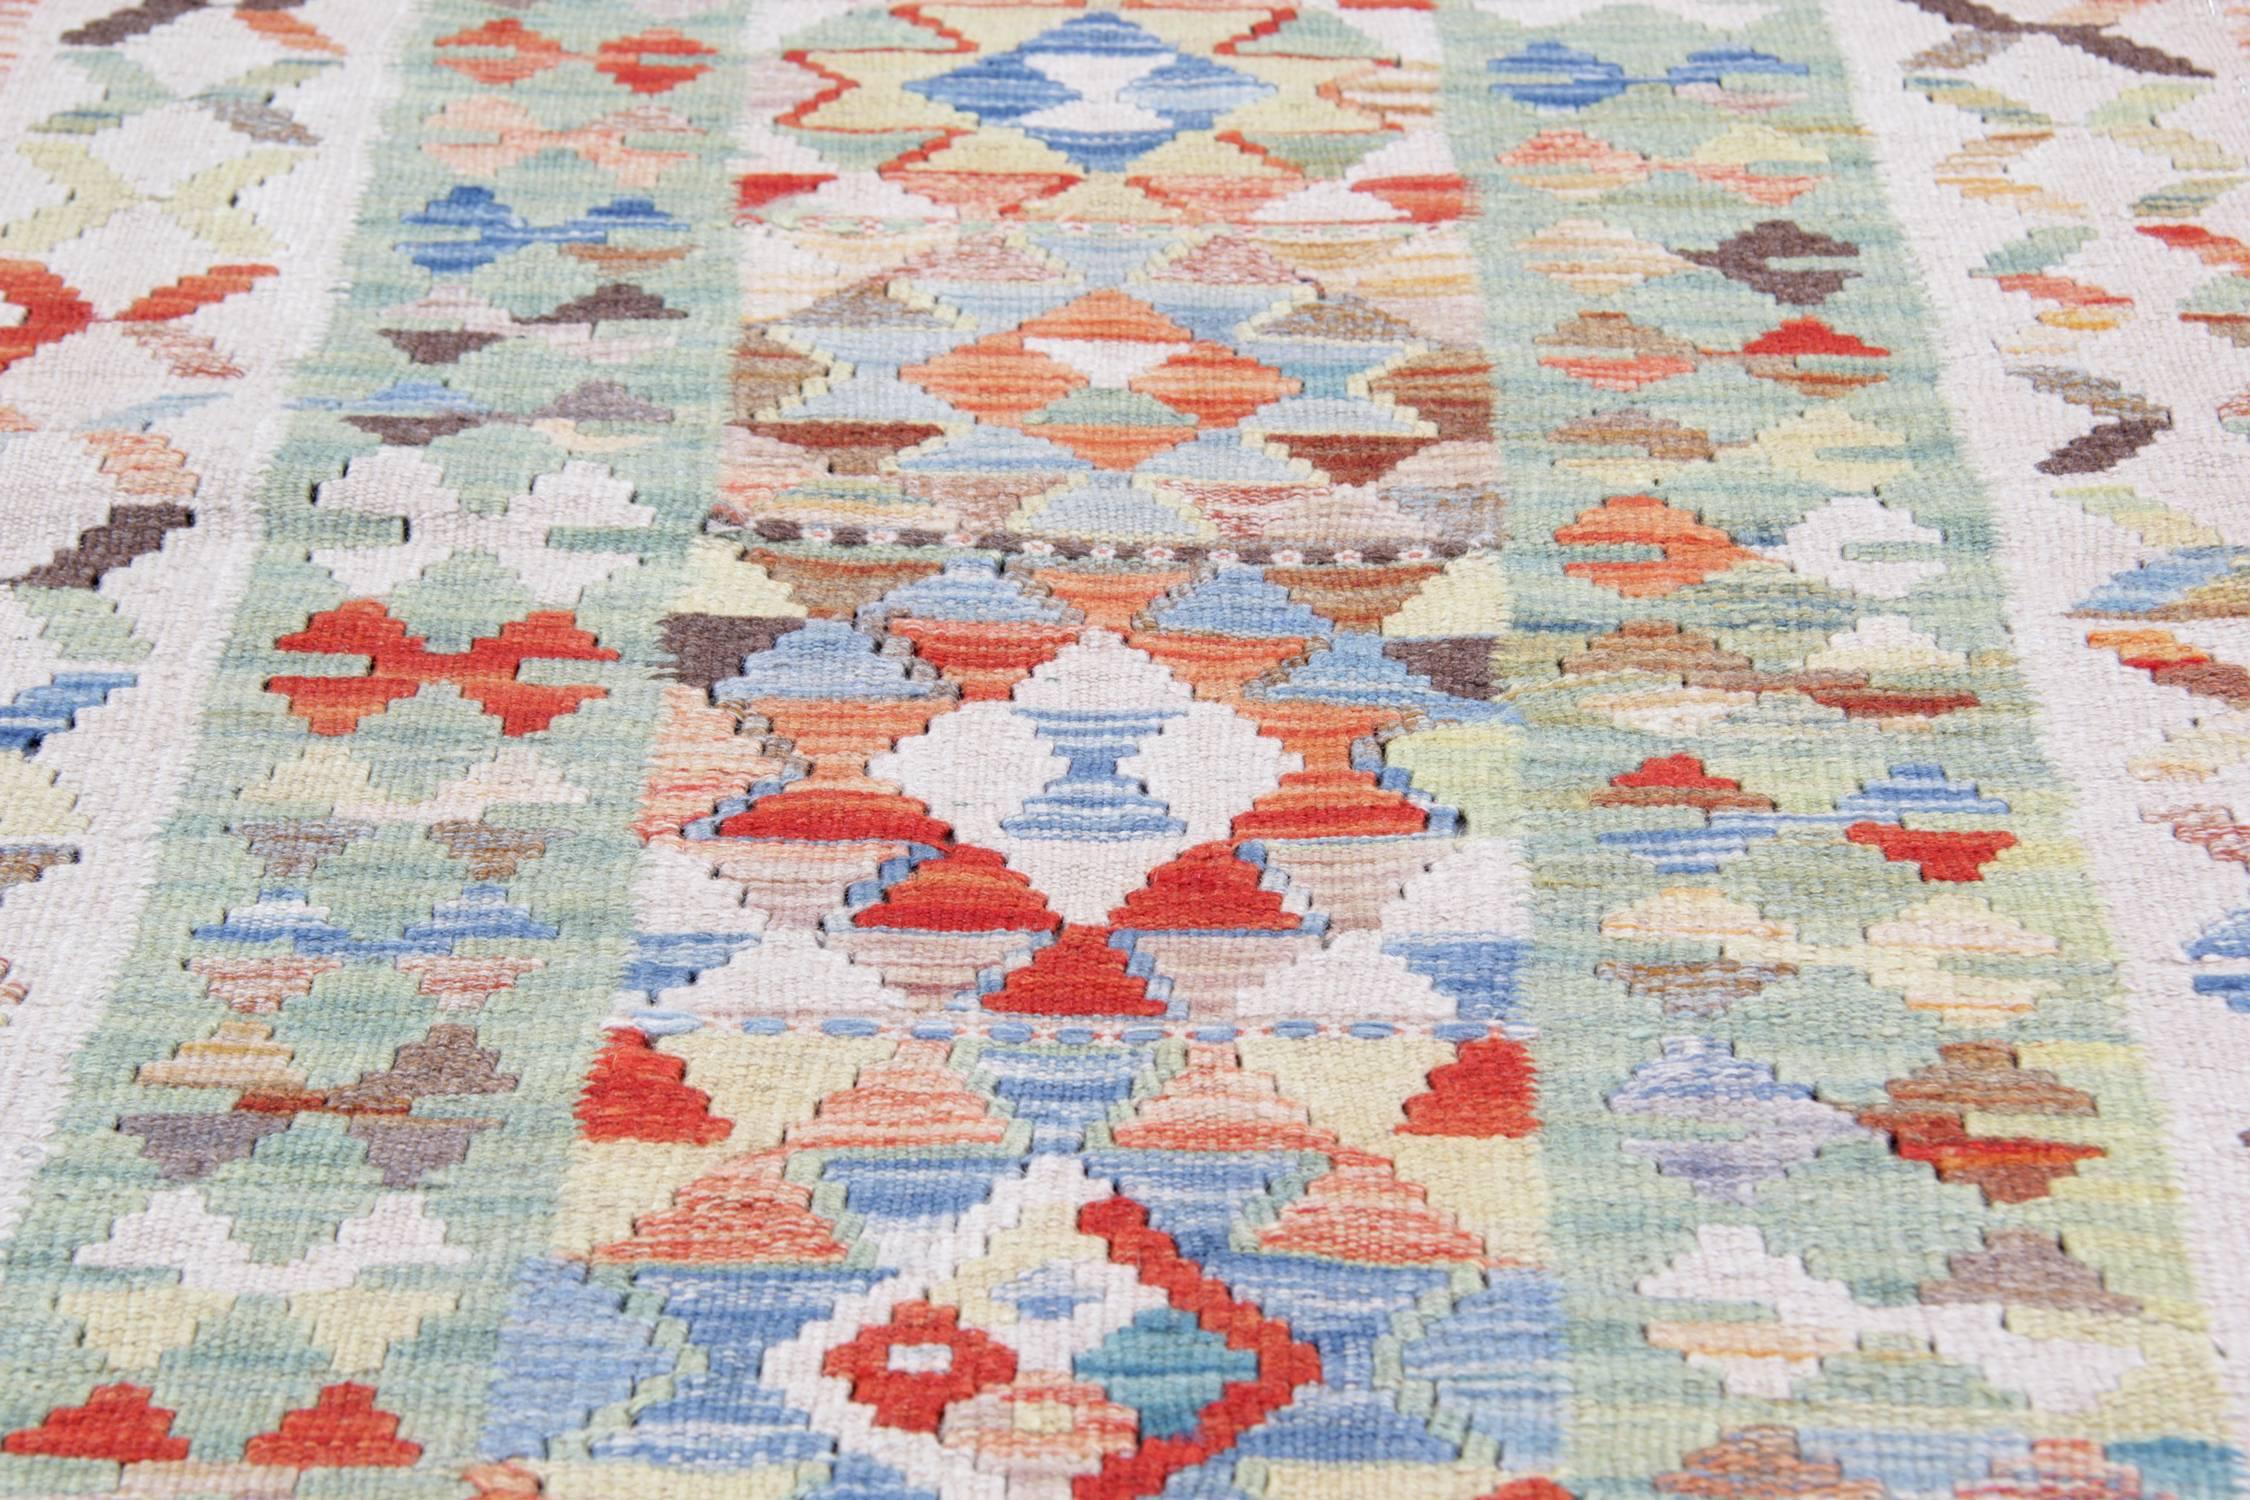 Woven Kilim Rugs, Traditional Rugs, Persian Style Rugs, Carpet from Afghanistan